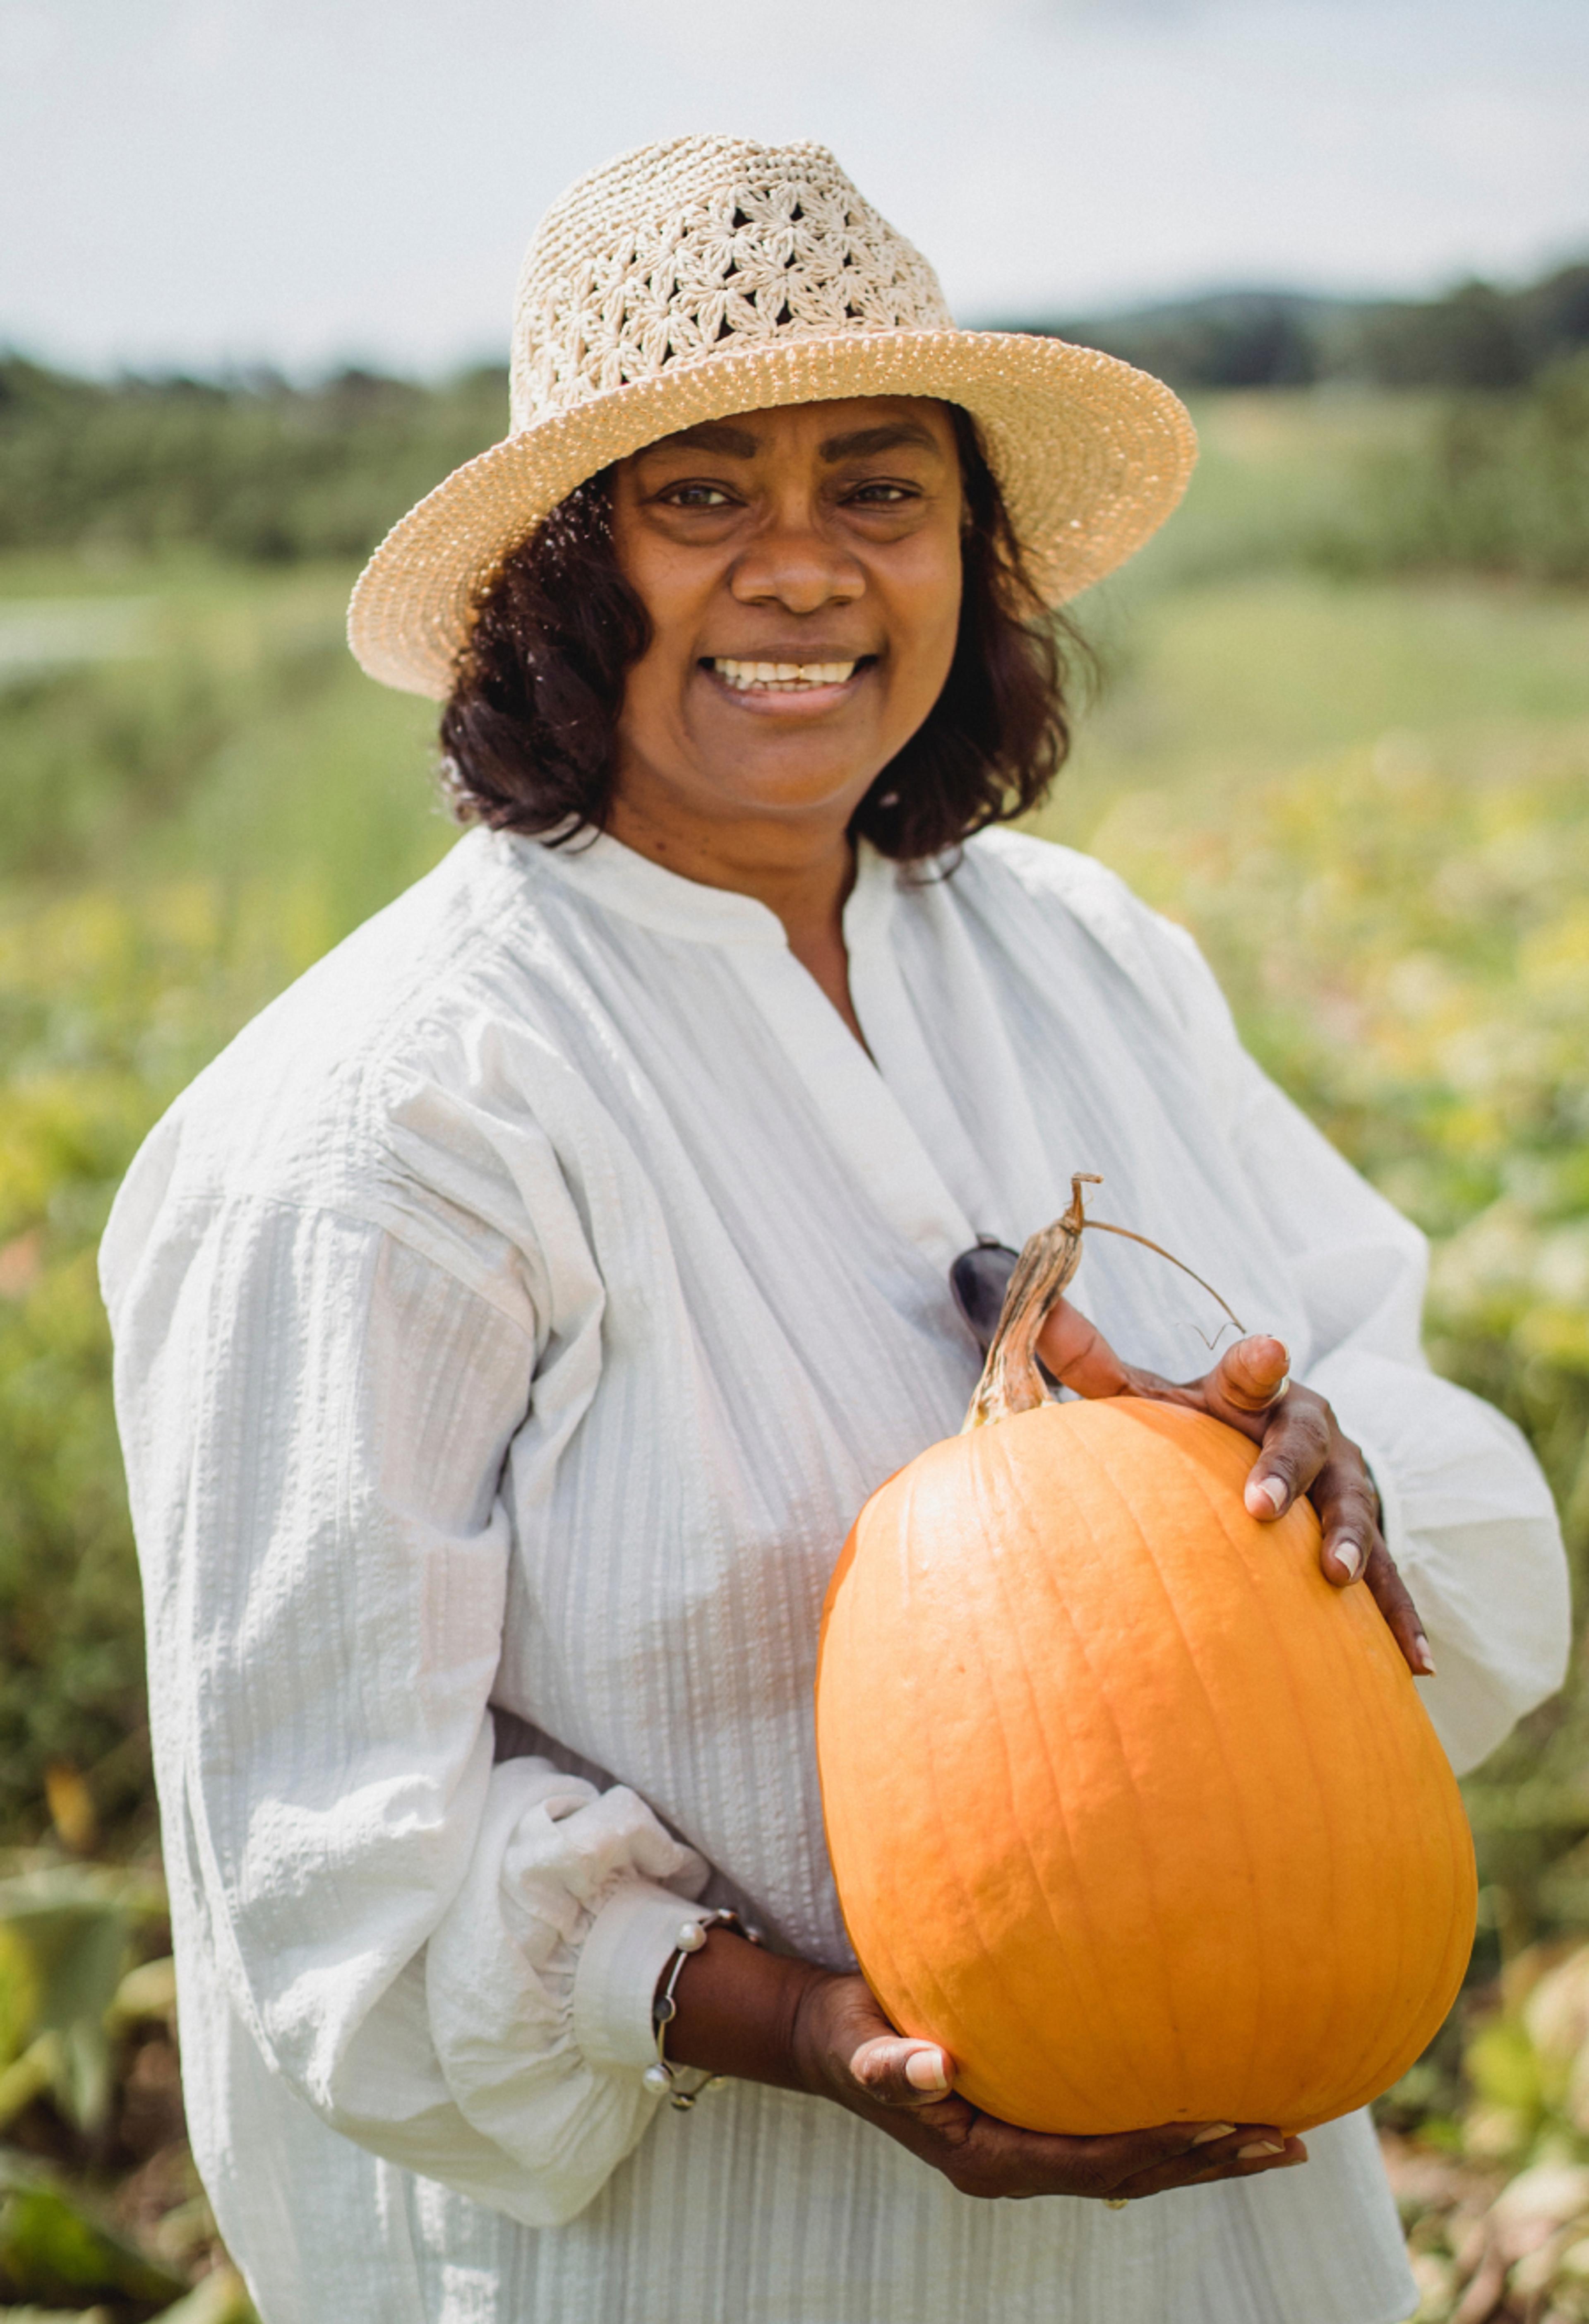 A person with a hat in a field, holding a very large pumpkin.